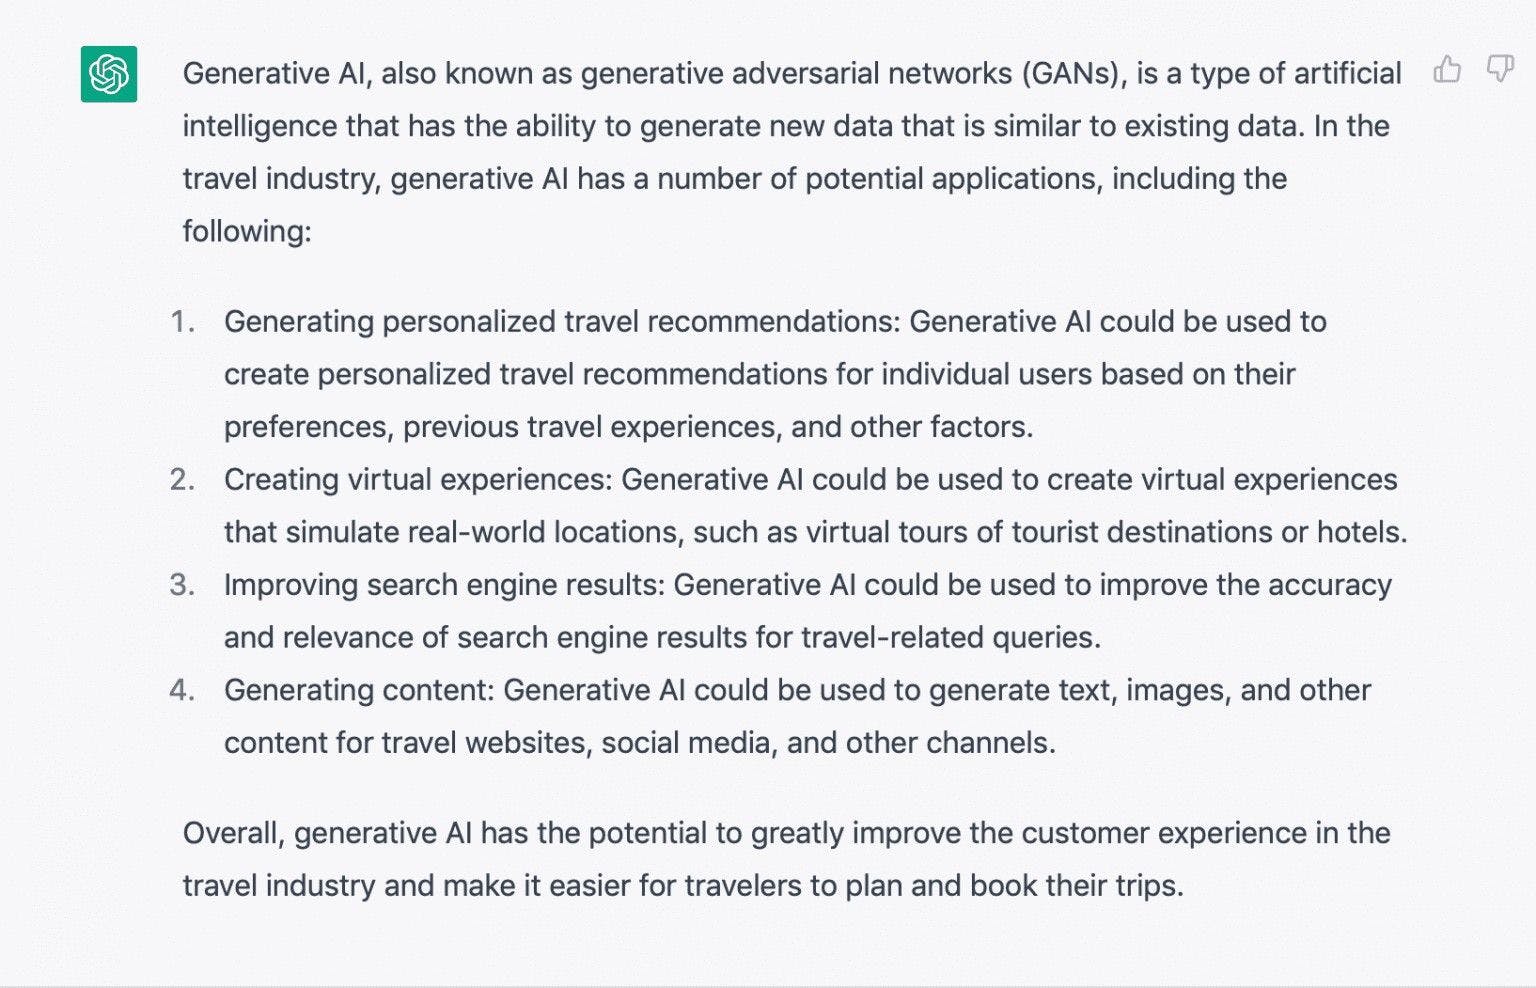 What are the applications of generative AI for the travel industry?